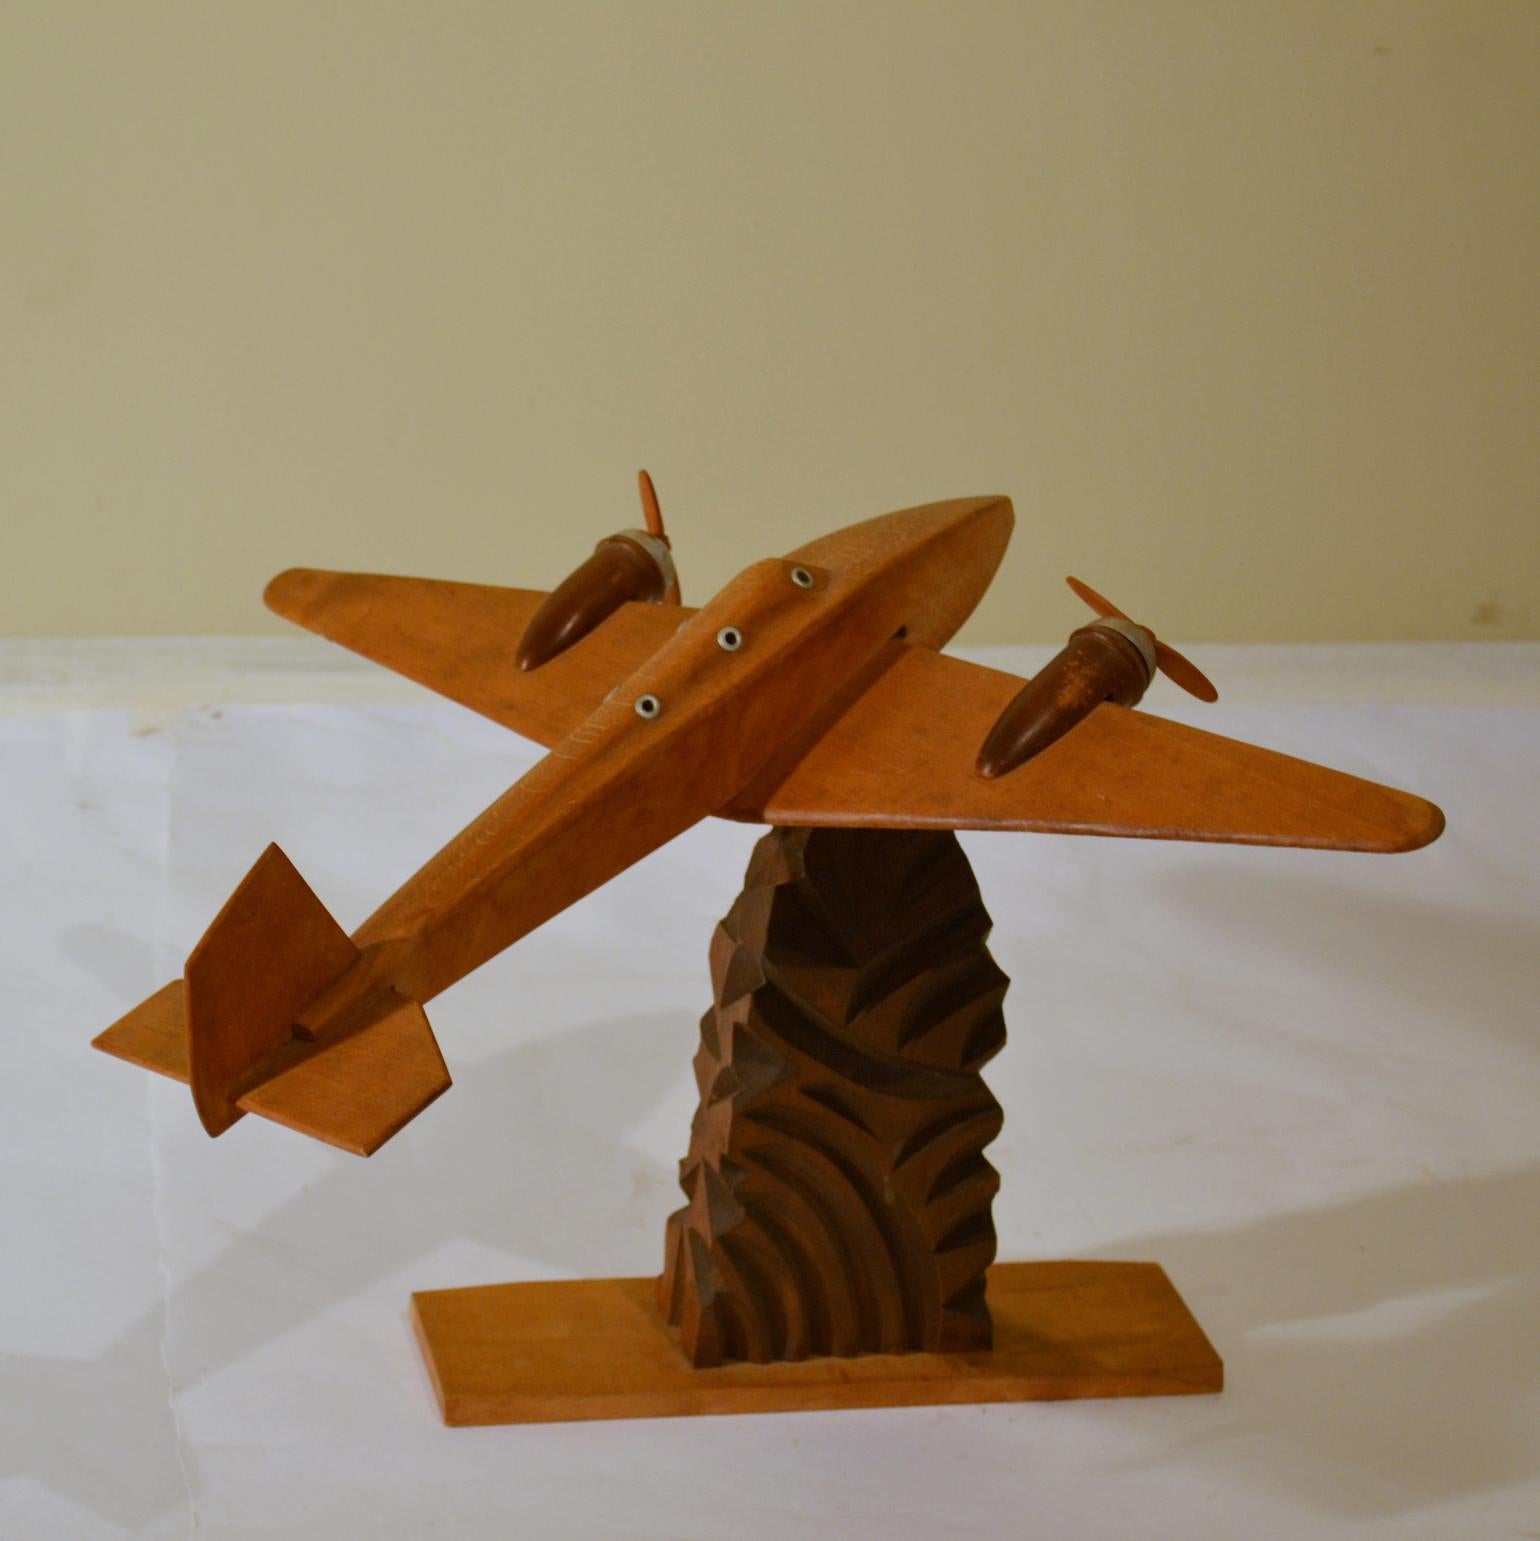 Airplane model carved in wood, circa 1940s-1950s. Decorative sculpture that displays well cupboard, credenza or a desk.